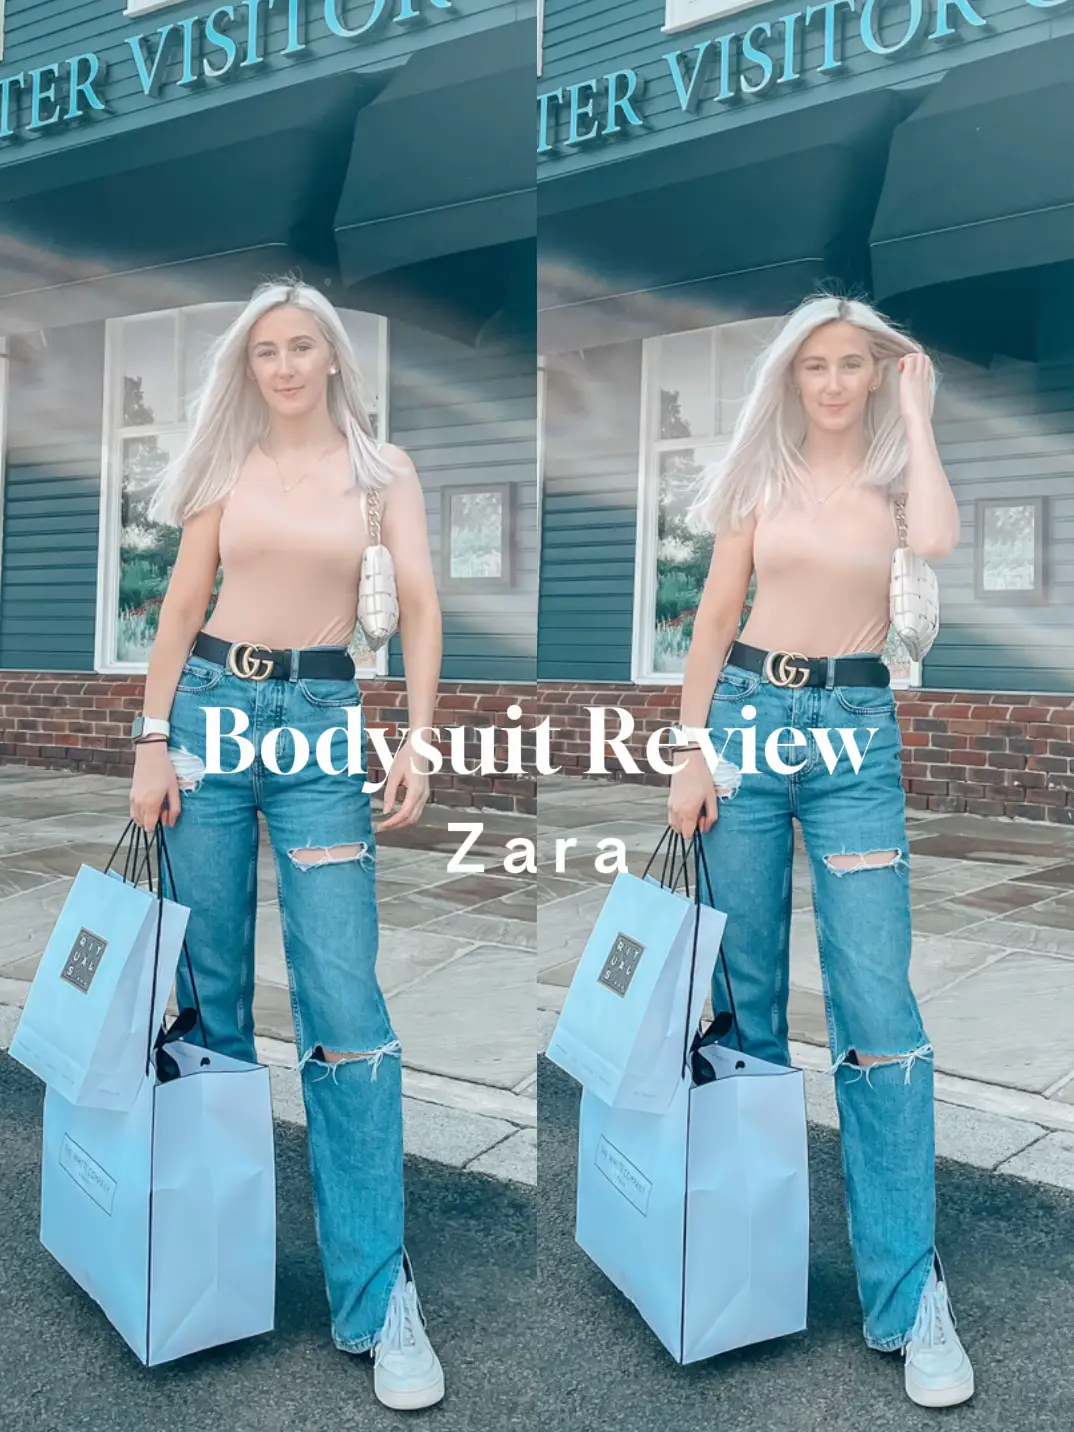 Bodysuit Review - Zara ✨, Gallery posted by IsobelCeline